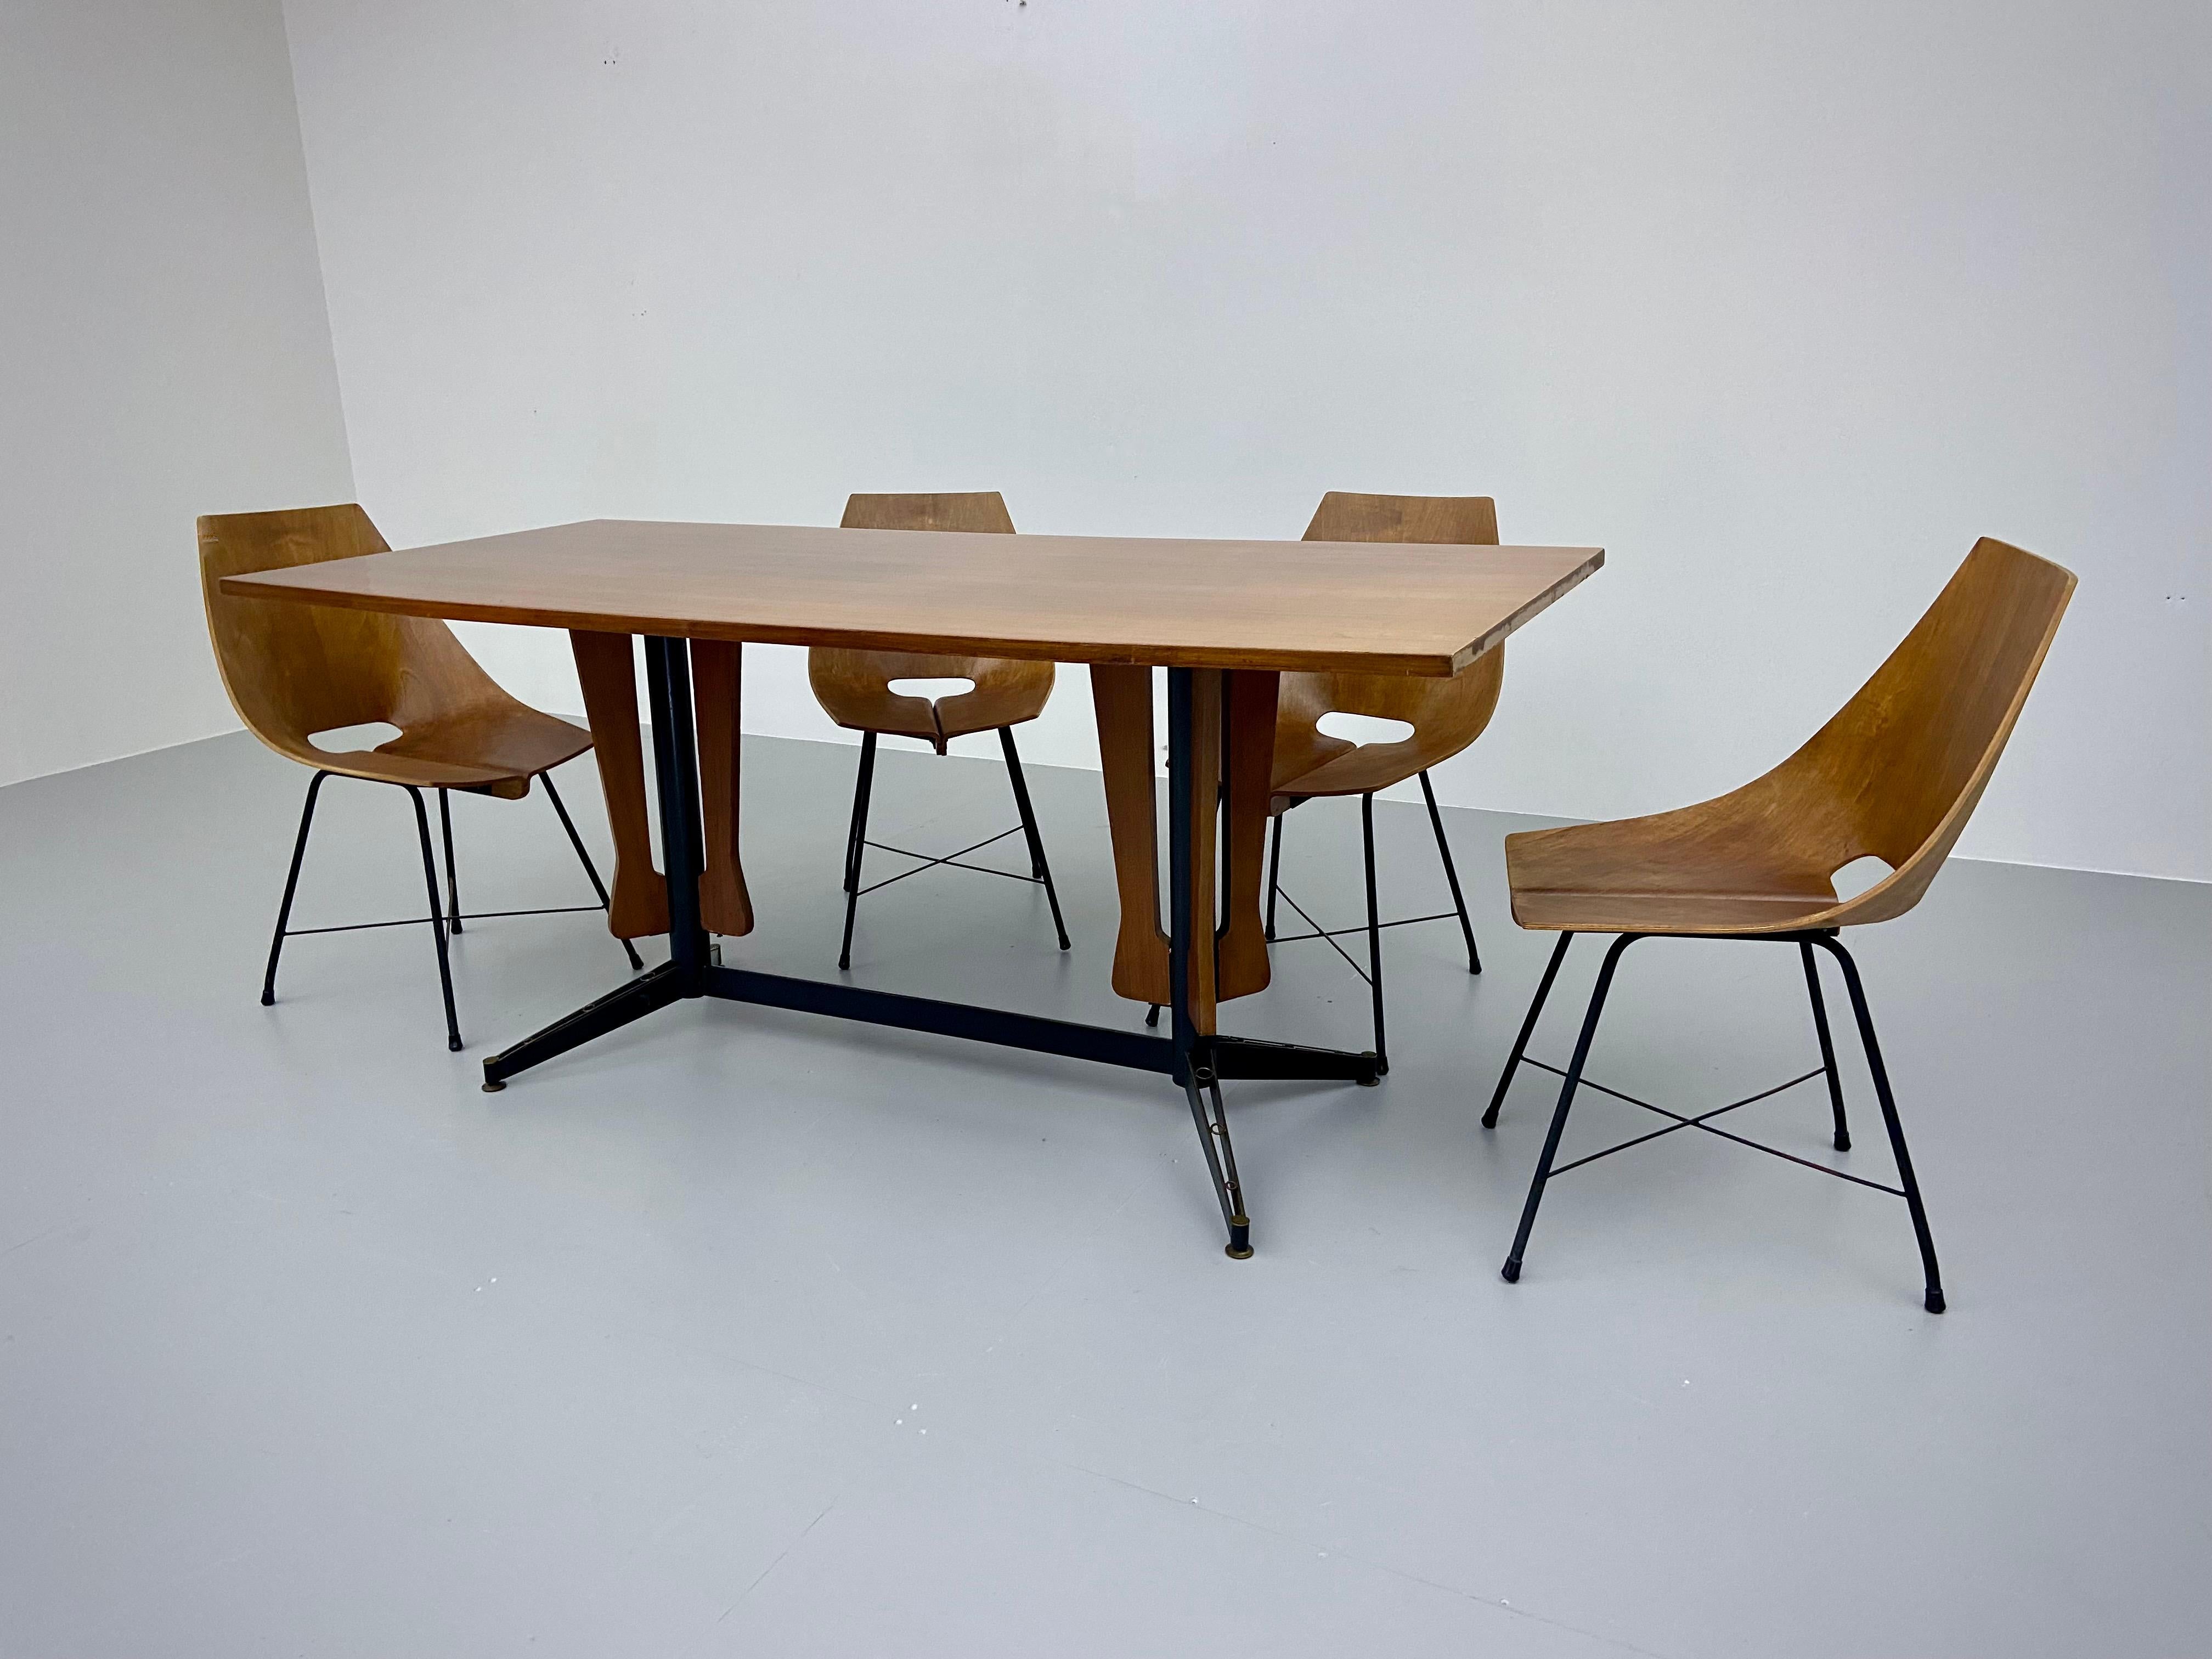 Carlo Ratti Dining Table in Wood and Metal, Italy, 1960's For Sale 1